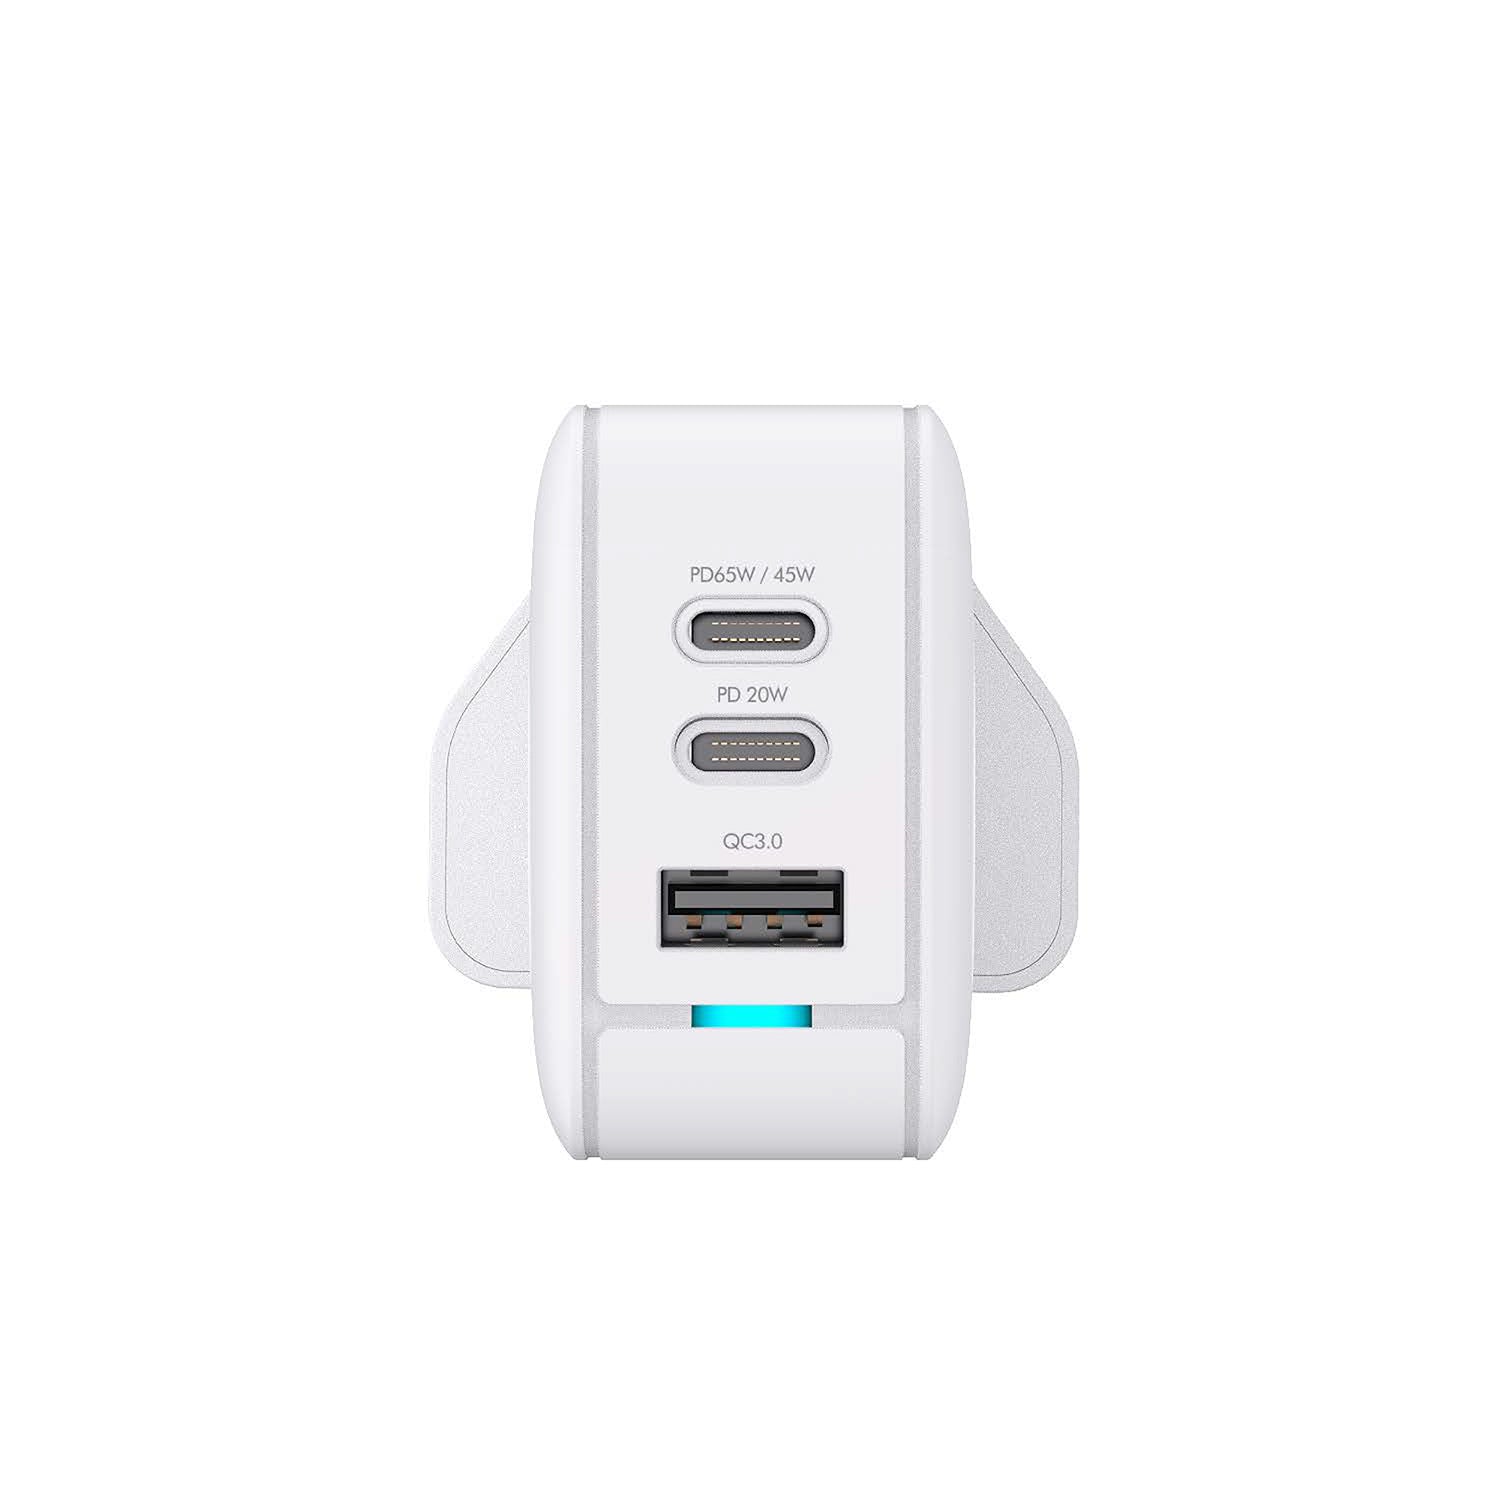 Skyzer PD158 SpeedPro 65W Max Fast Charging Wall Charger with 2 USB-C + 1 USB-A Port